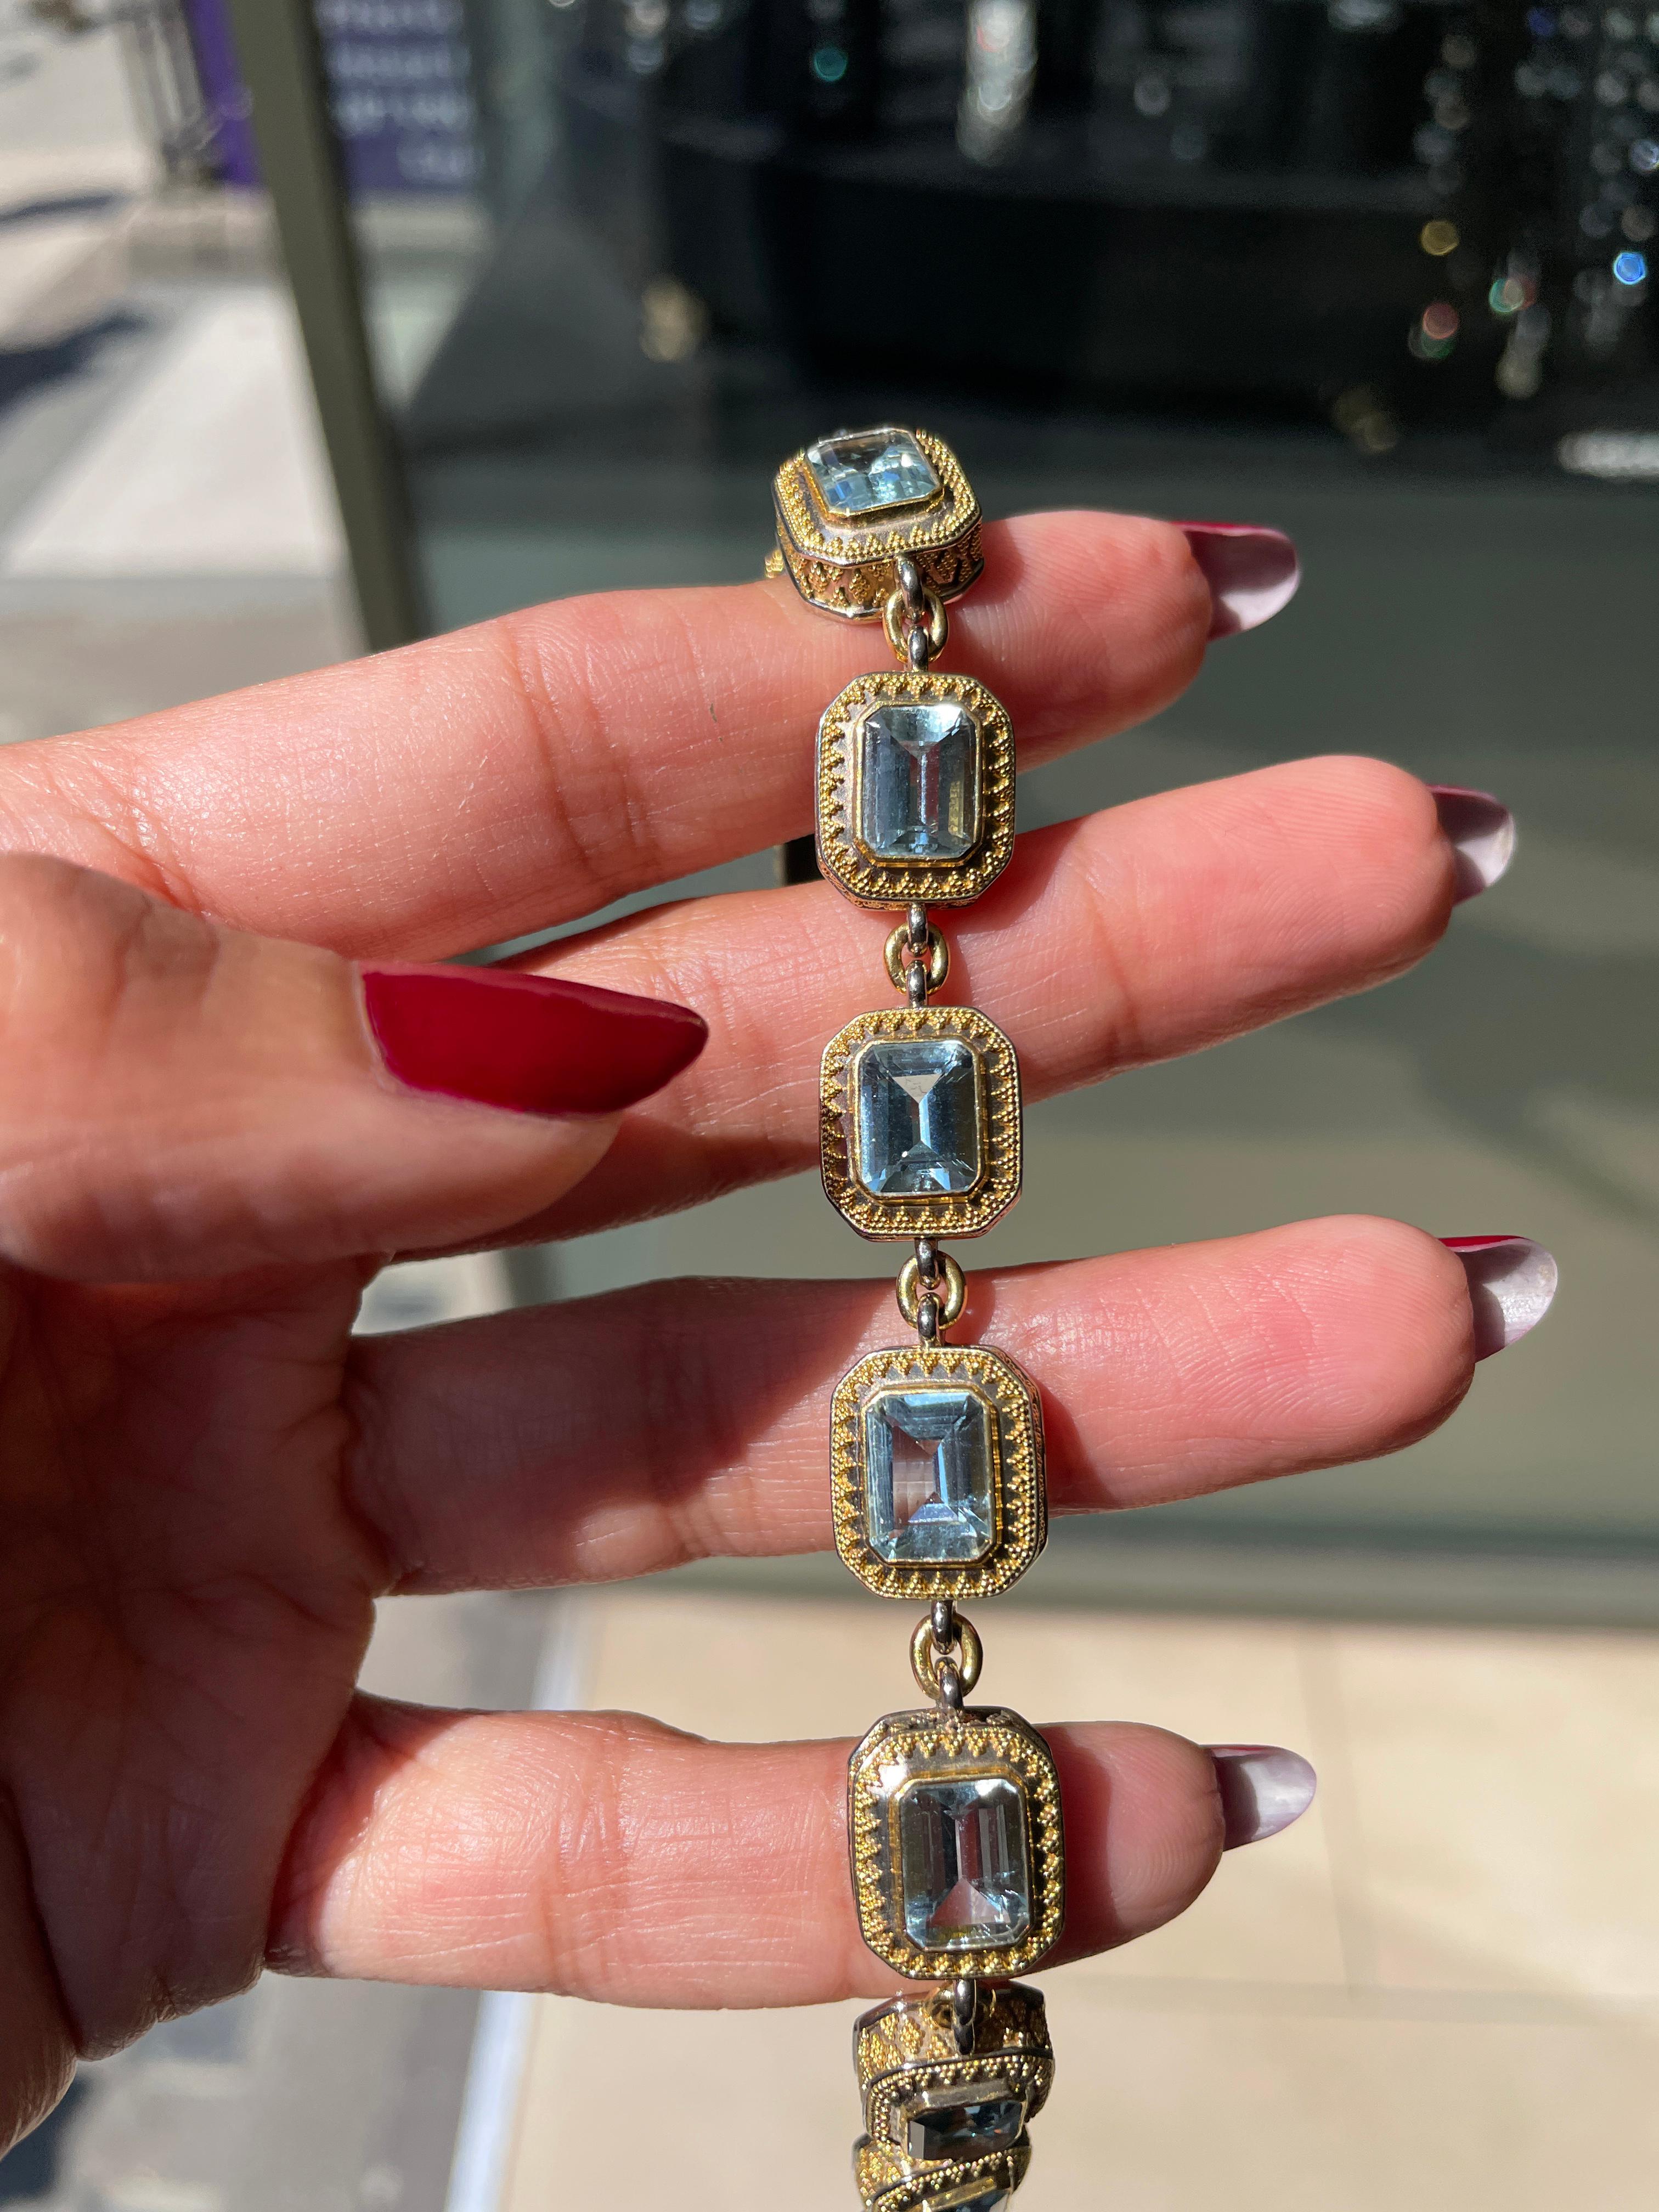 Modern link gold bracelet set with ten emerald cut aquamarines weighing approximately 1.25 carat - 1.50 carat each. The stones are individually mounted in solid decorative rub-over open back collets and all connected with a yellow gold link. Stamped